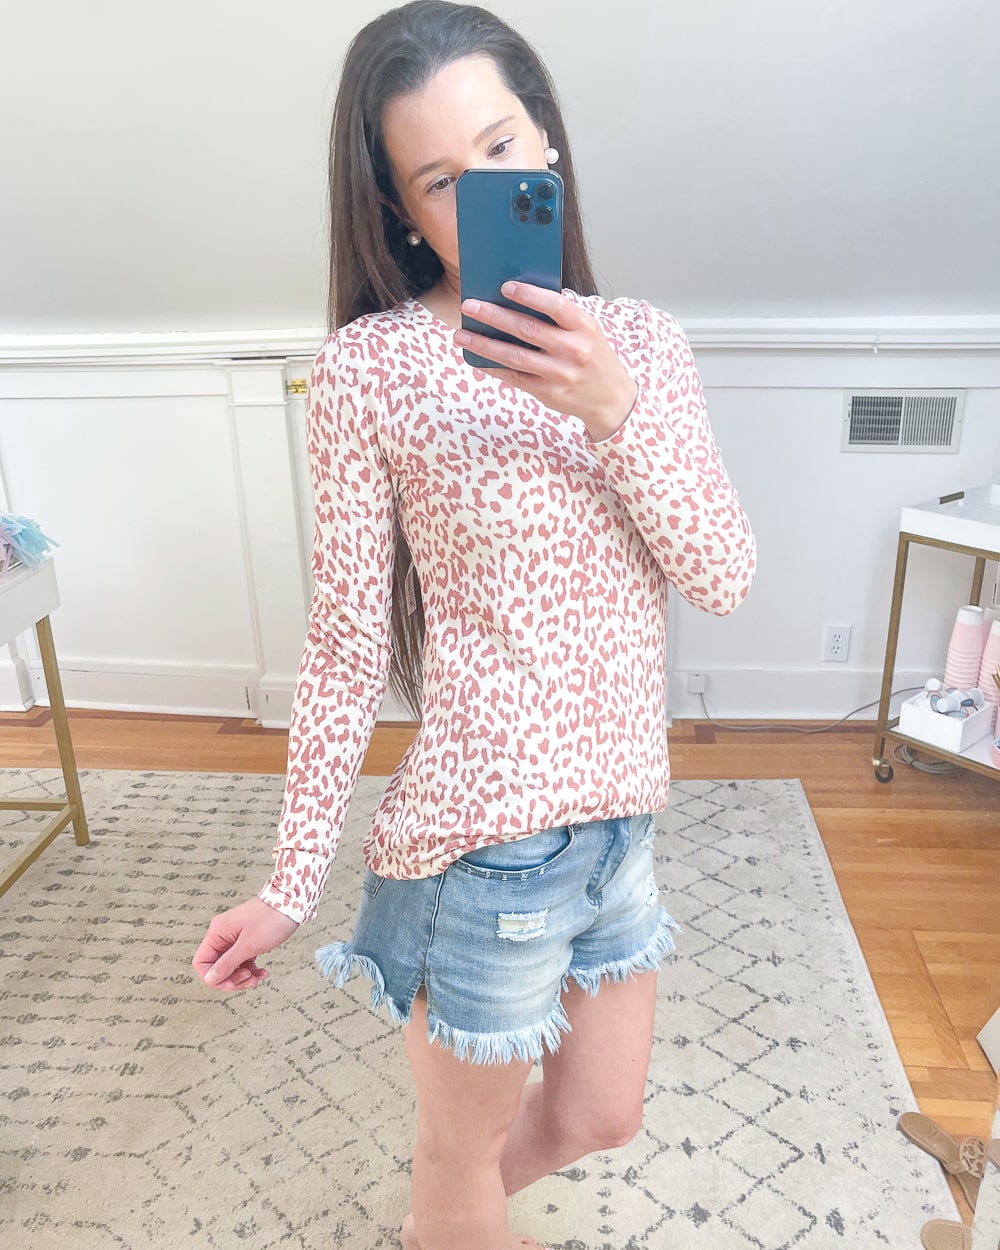 Blogger Stephanie Ziajka shares a detail shot of her leopard print Amazon Daily Ritual long sleeve terry top on Diary of a Debutante